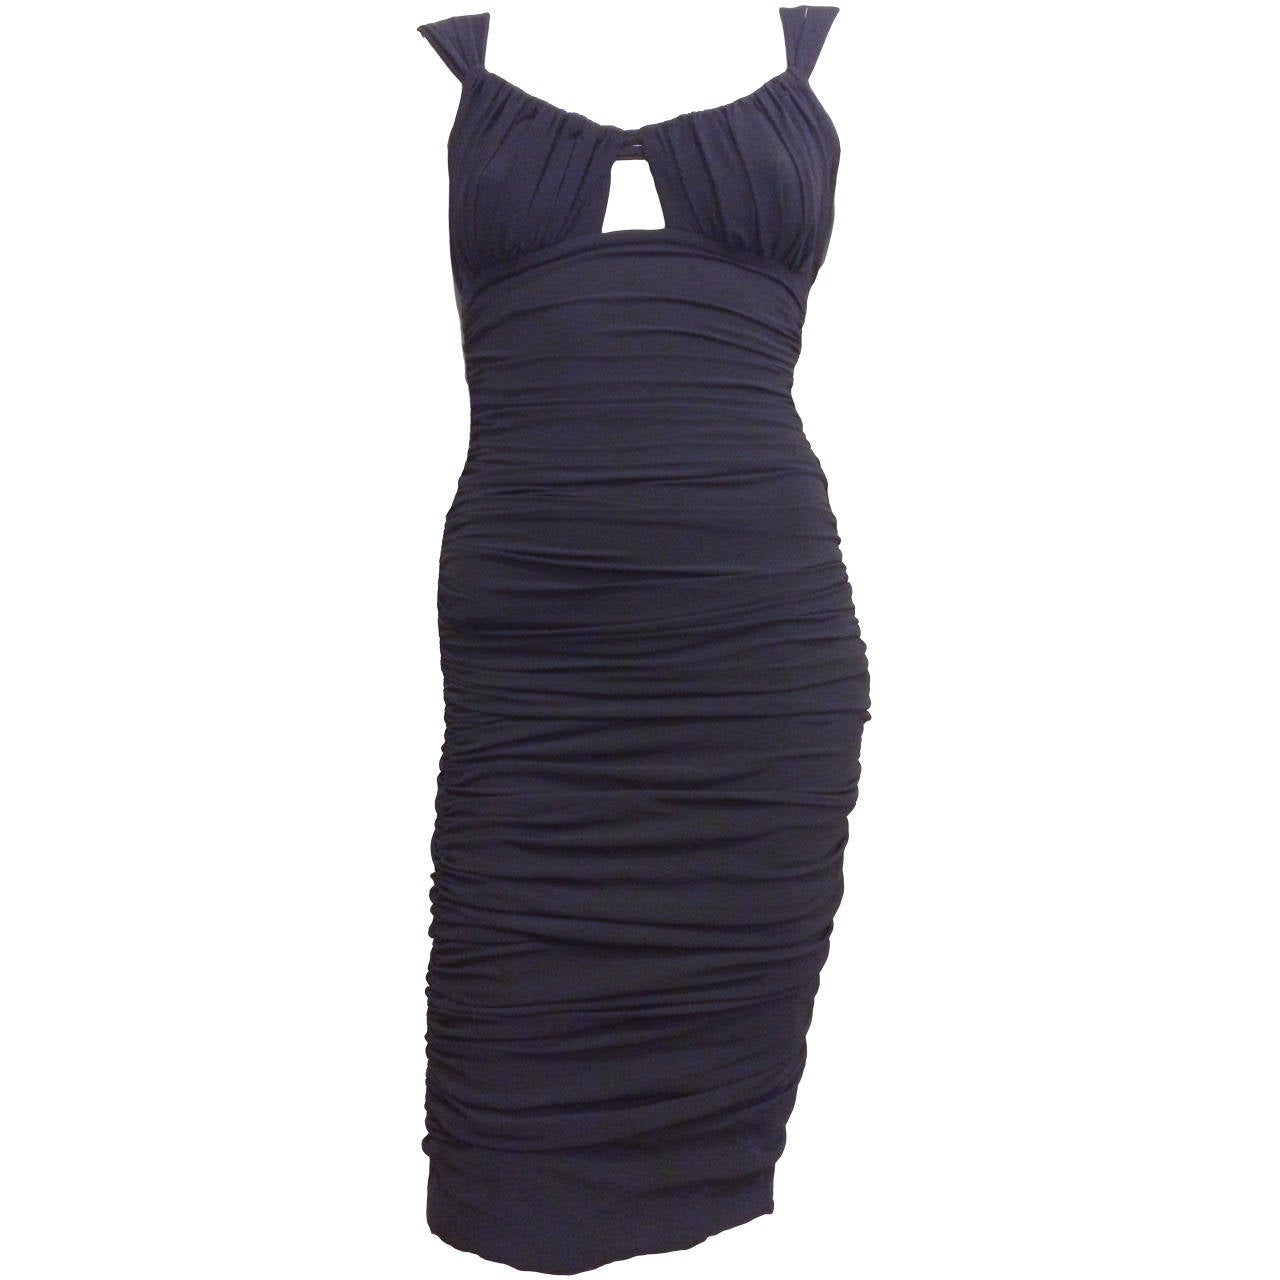 Versace Black Ruched Dress with Scoopneck